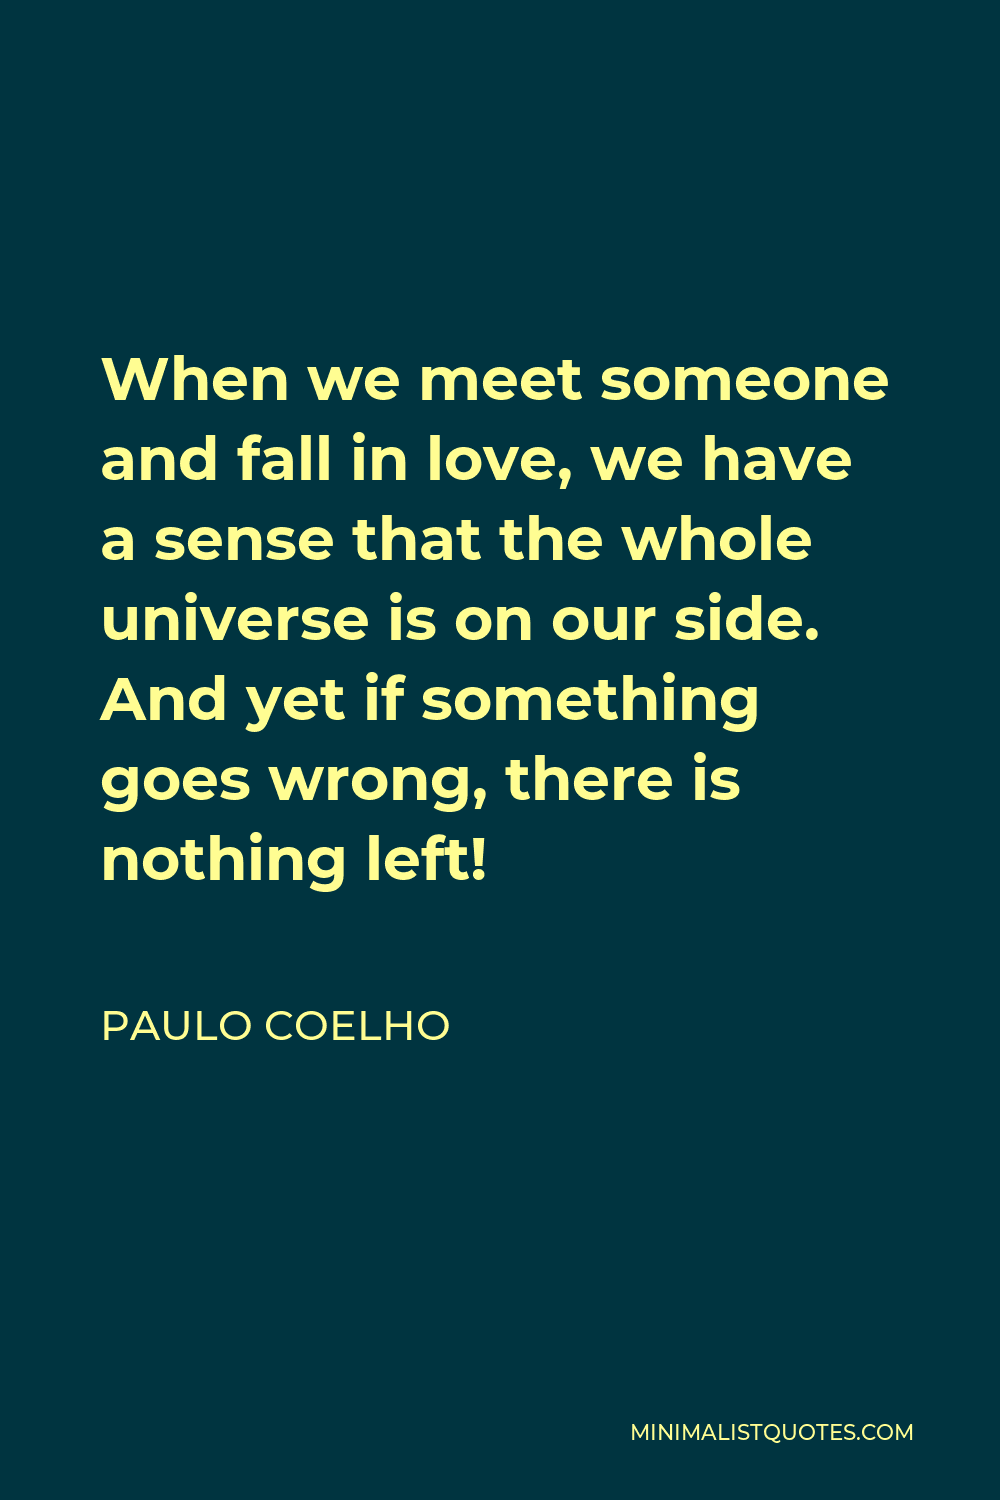 Paulo Coelho Quote - When we meet someone and fall in love, we have a sense that the whole universe is on our side. And yet if something goes wrong, there is nothing left!